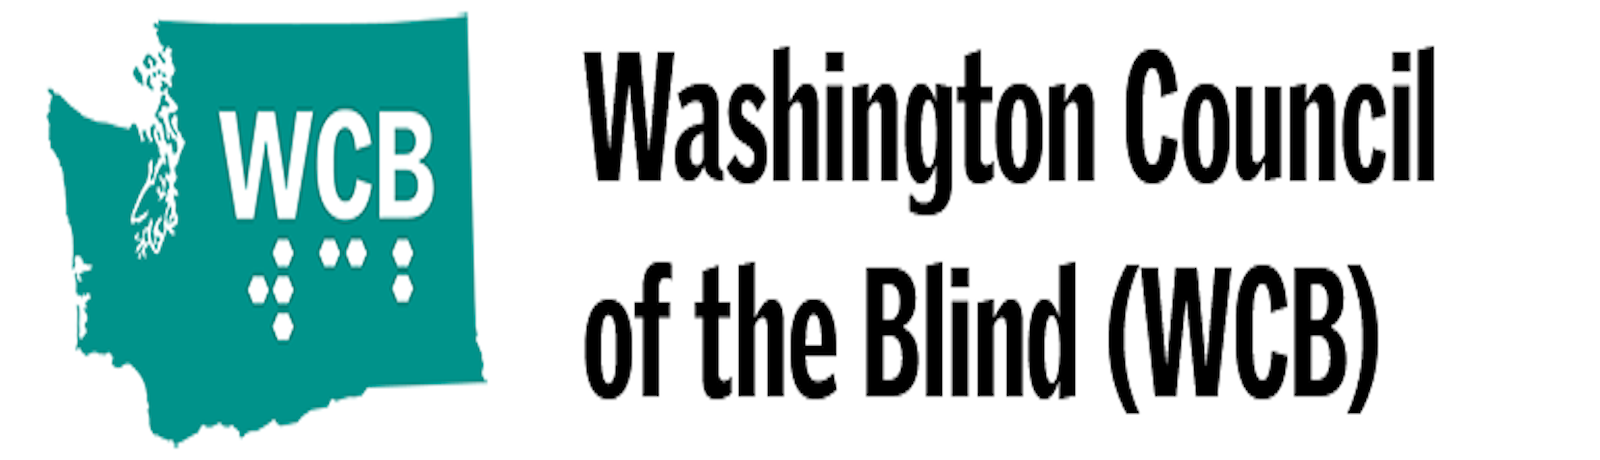 Resources Washington Council Of The Blind